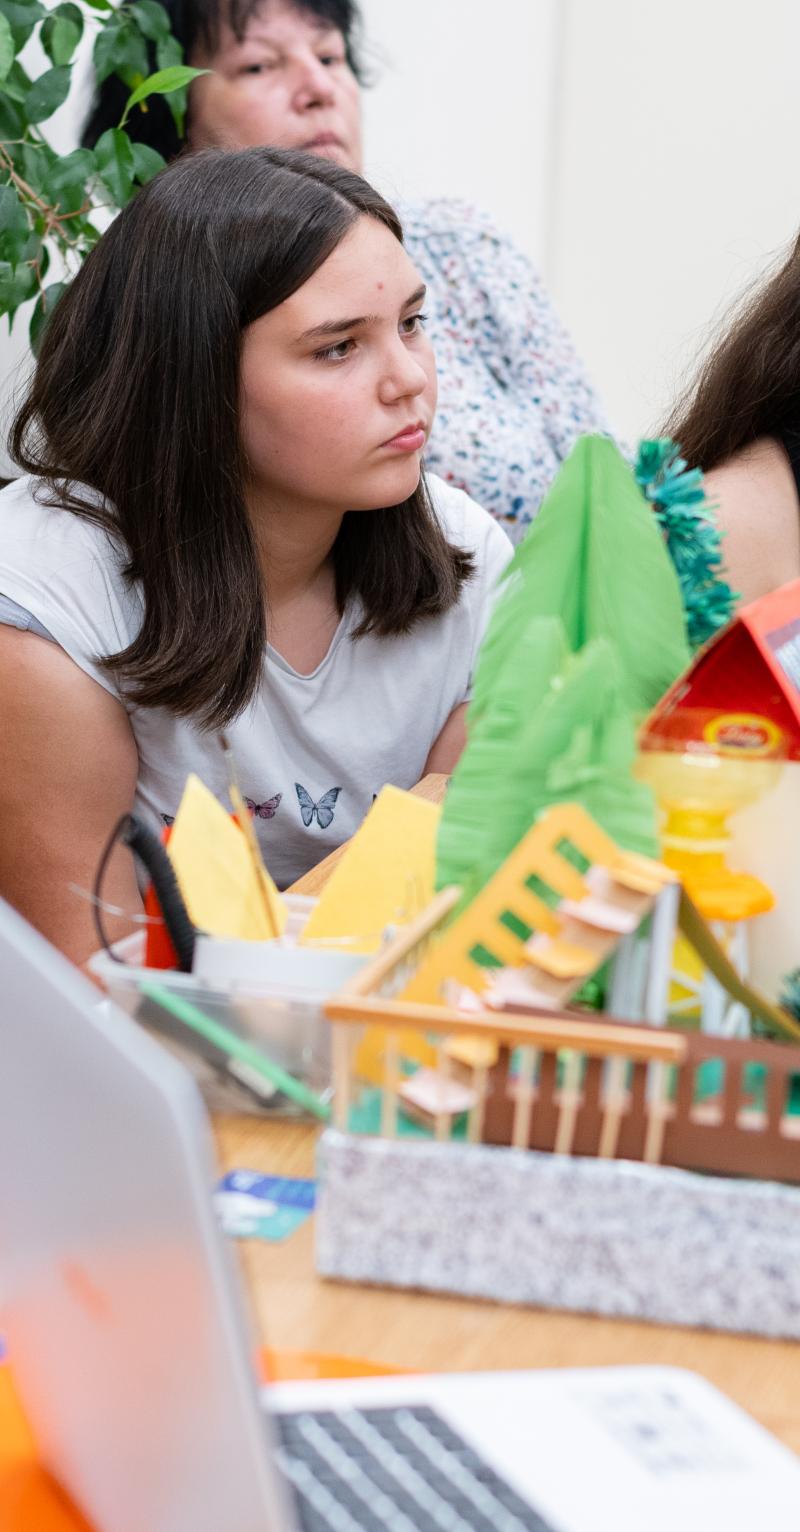 In Bulgaria, a group of secondary students is sitting around a climate change project in the form of a diorama. One of the students has her mouth open as she presents the project to an audience. There is an open laptop next to the diorama. The students have serious expressions on their faces.